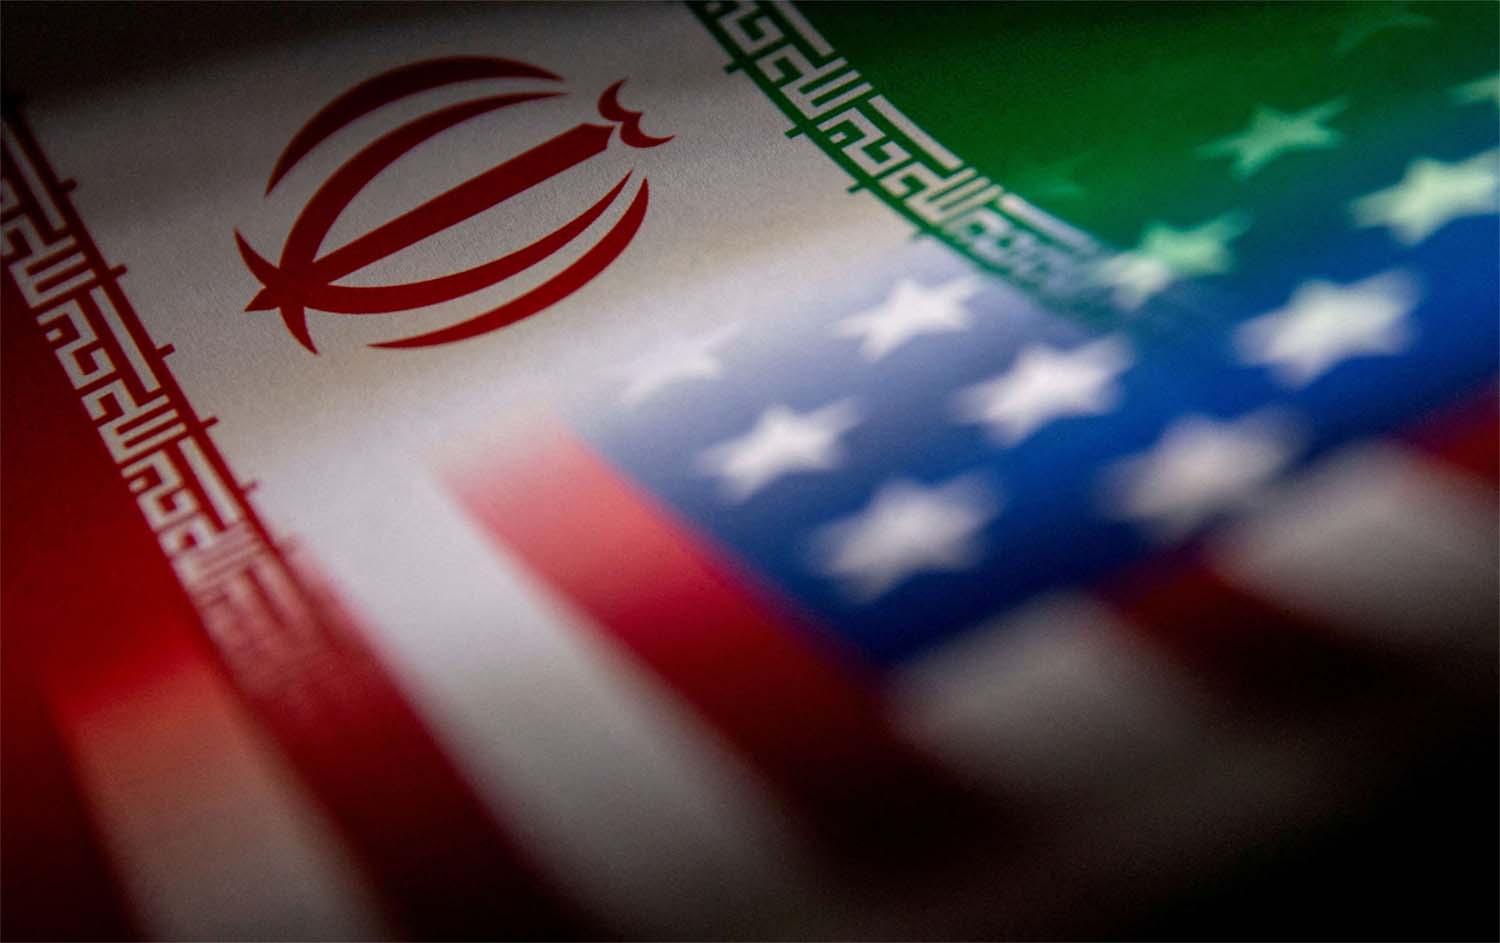 The Qatar-mediated deal sidesteps the thorny Iran-US nuclear dispute